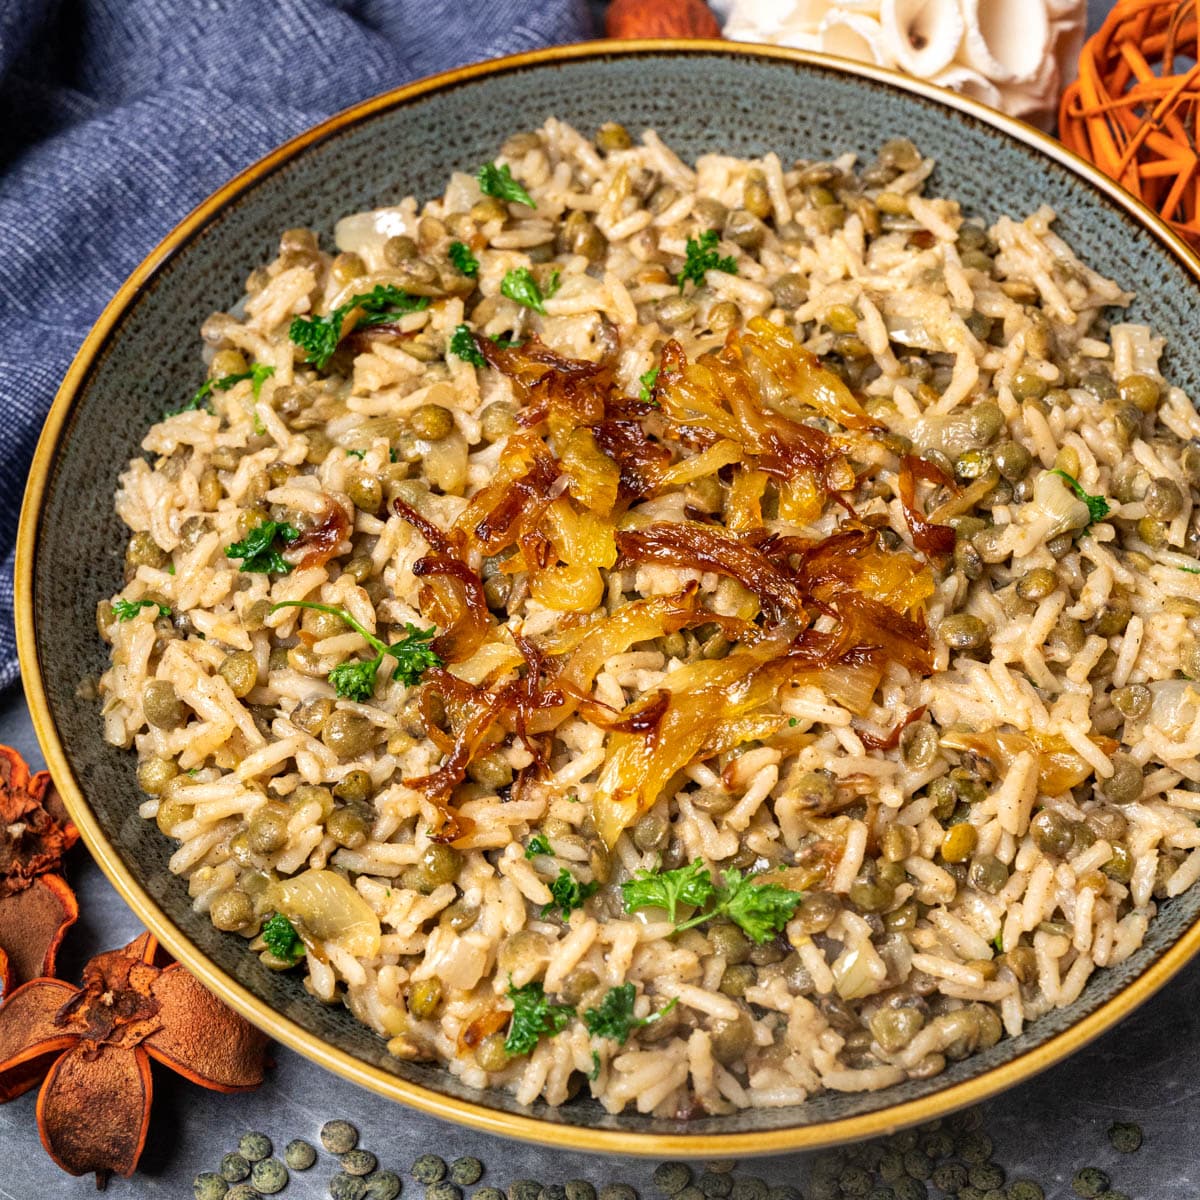 a plate of rice with lentils